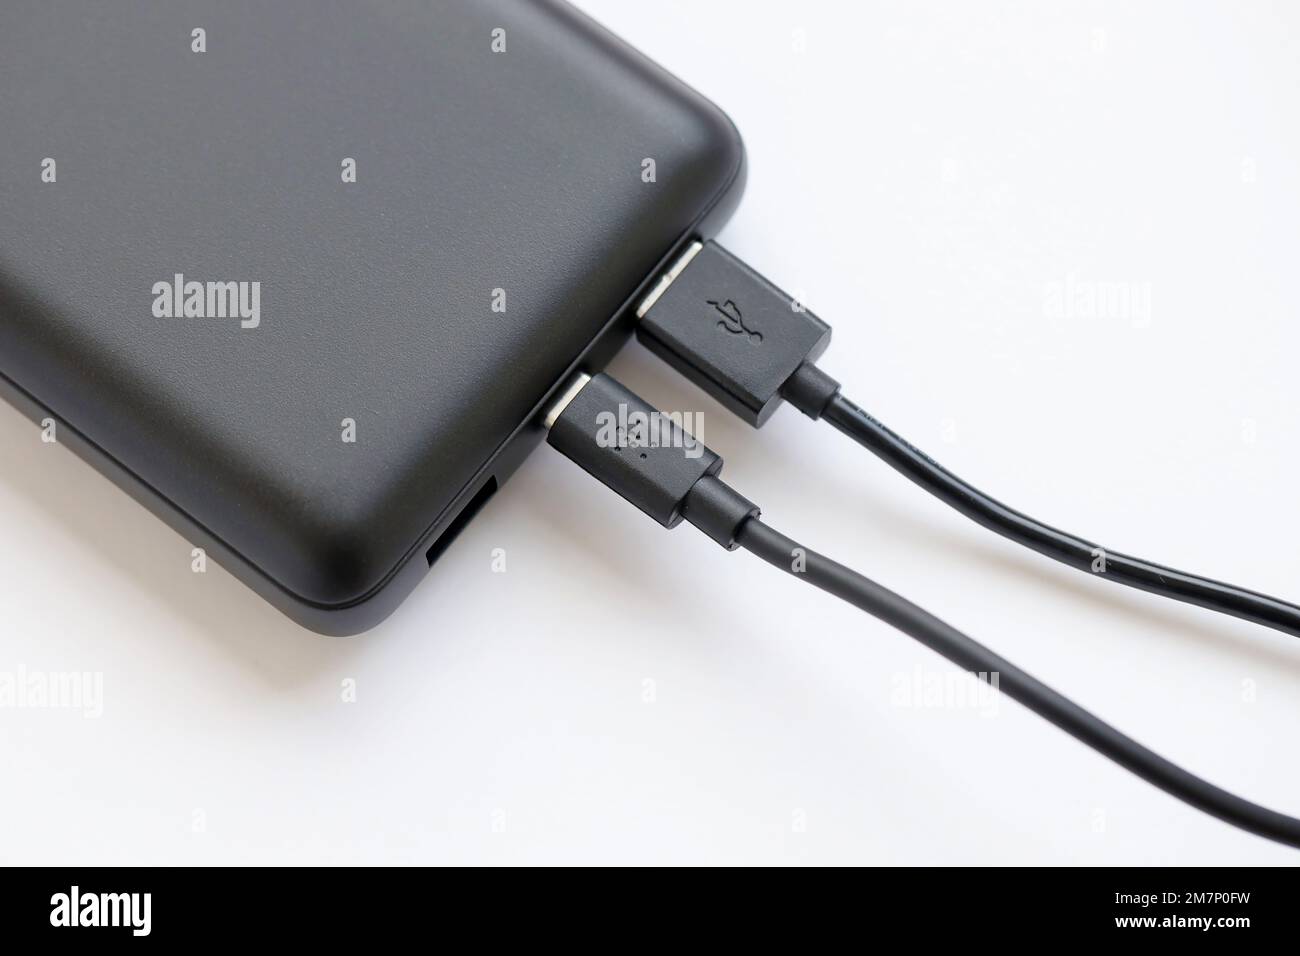 KYIV, UKRAINE - MAY 4, 2022 Portable Powerbank battery with logo of Belkin International, american manufacturer of consumer electronics that specializes in connectivity devices Stock Photo